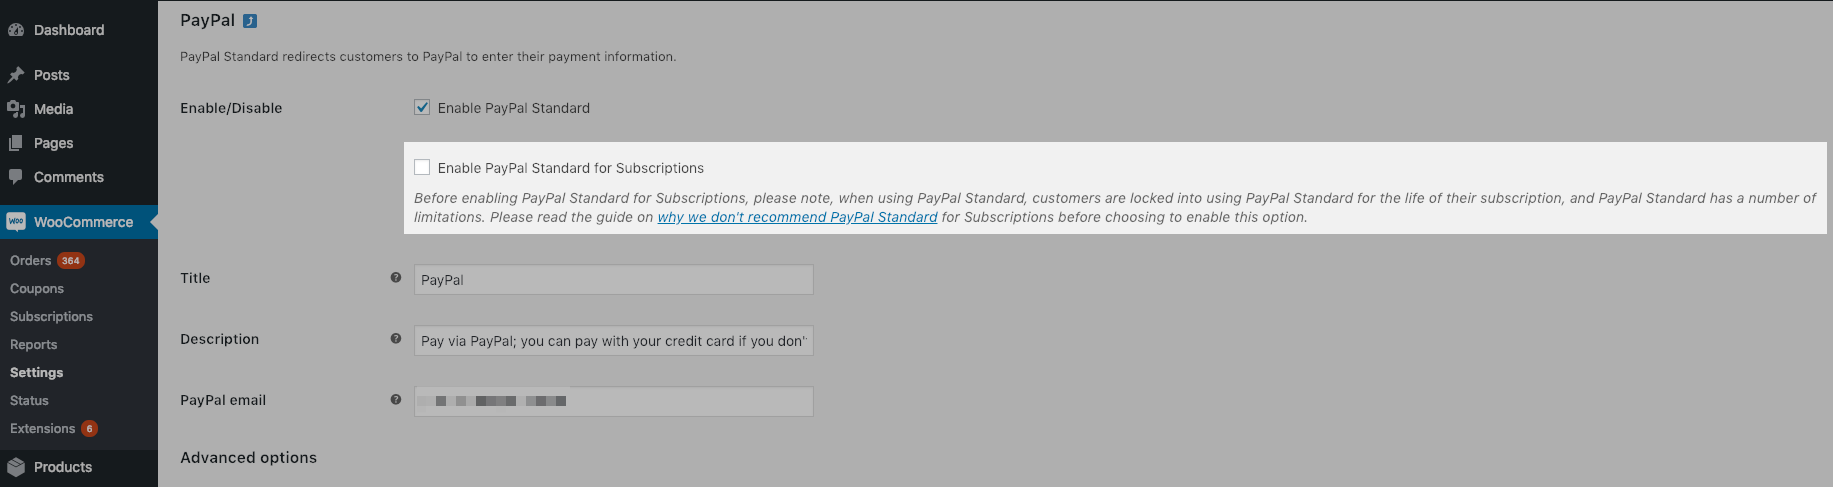 PayPal Standard for Subscriptions Setting - Disabled